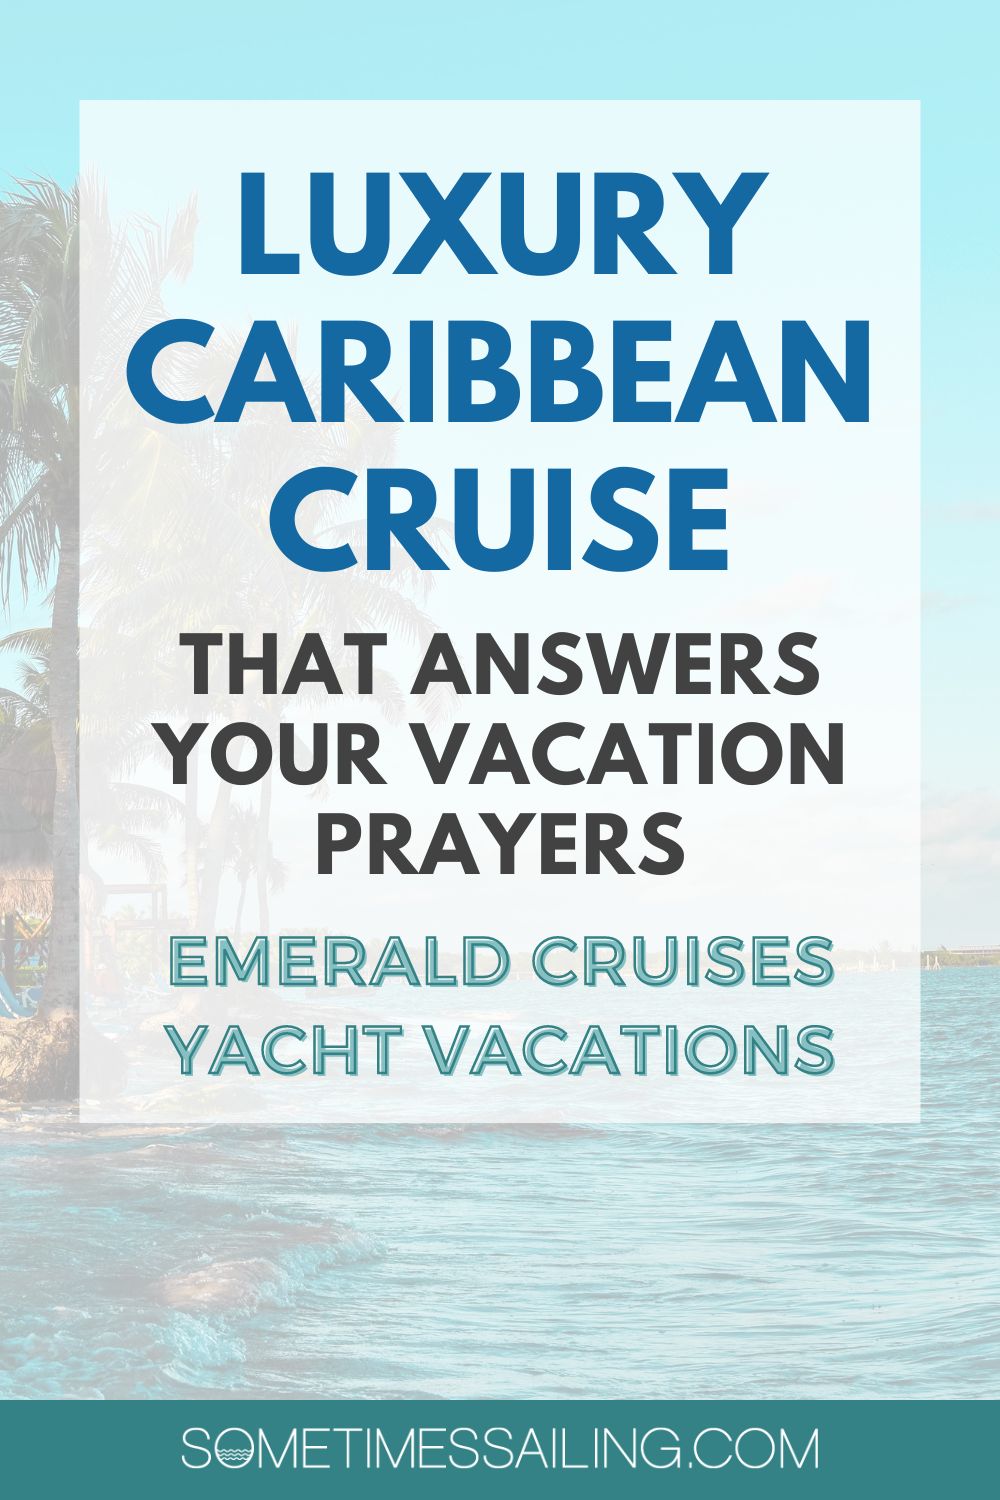 Luxury Caribbean Cruise that Answers Your Vacation Prayers: Emerald Cruises Yachts, with a faded photo of the side of the Caribbean with a palm tree on an island.